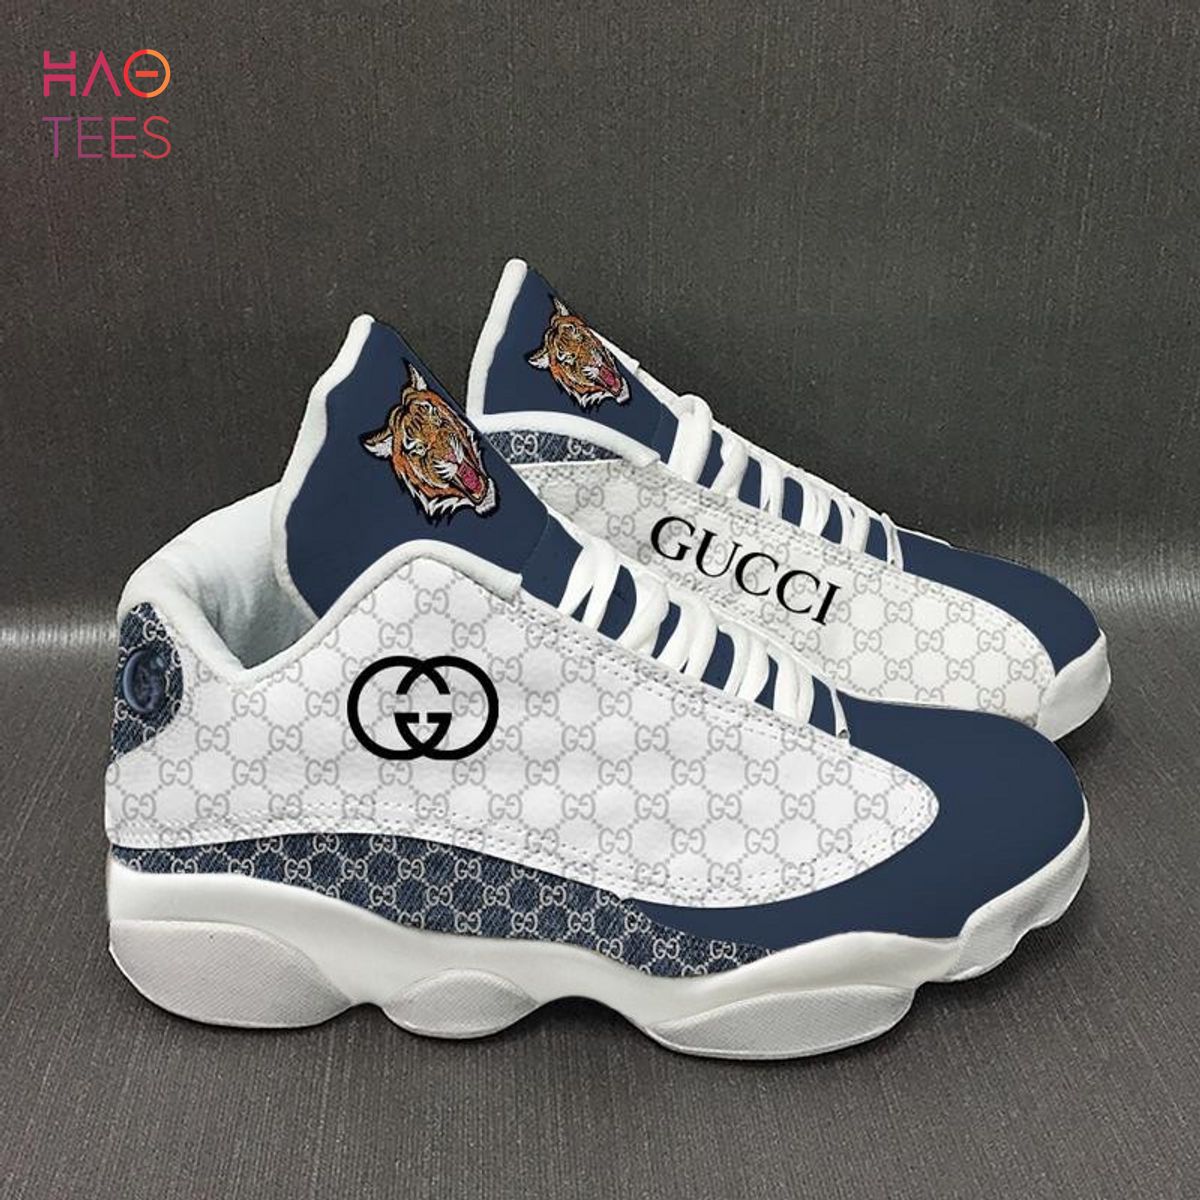 Air Jordan 13 Mix Gucci Tiger White Limited Edition Sneaker Shoes